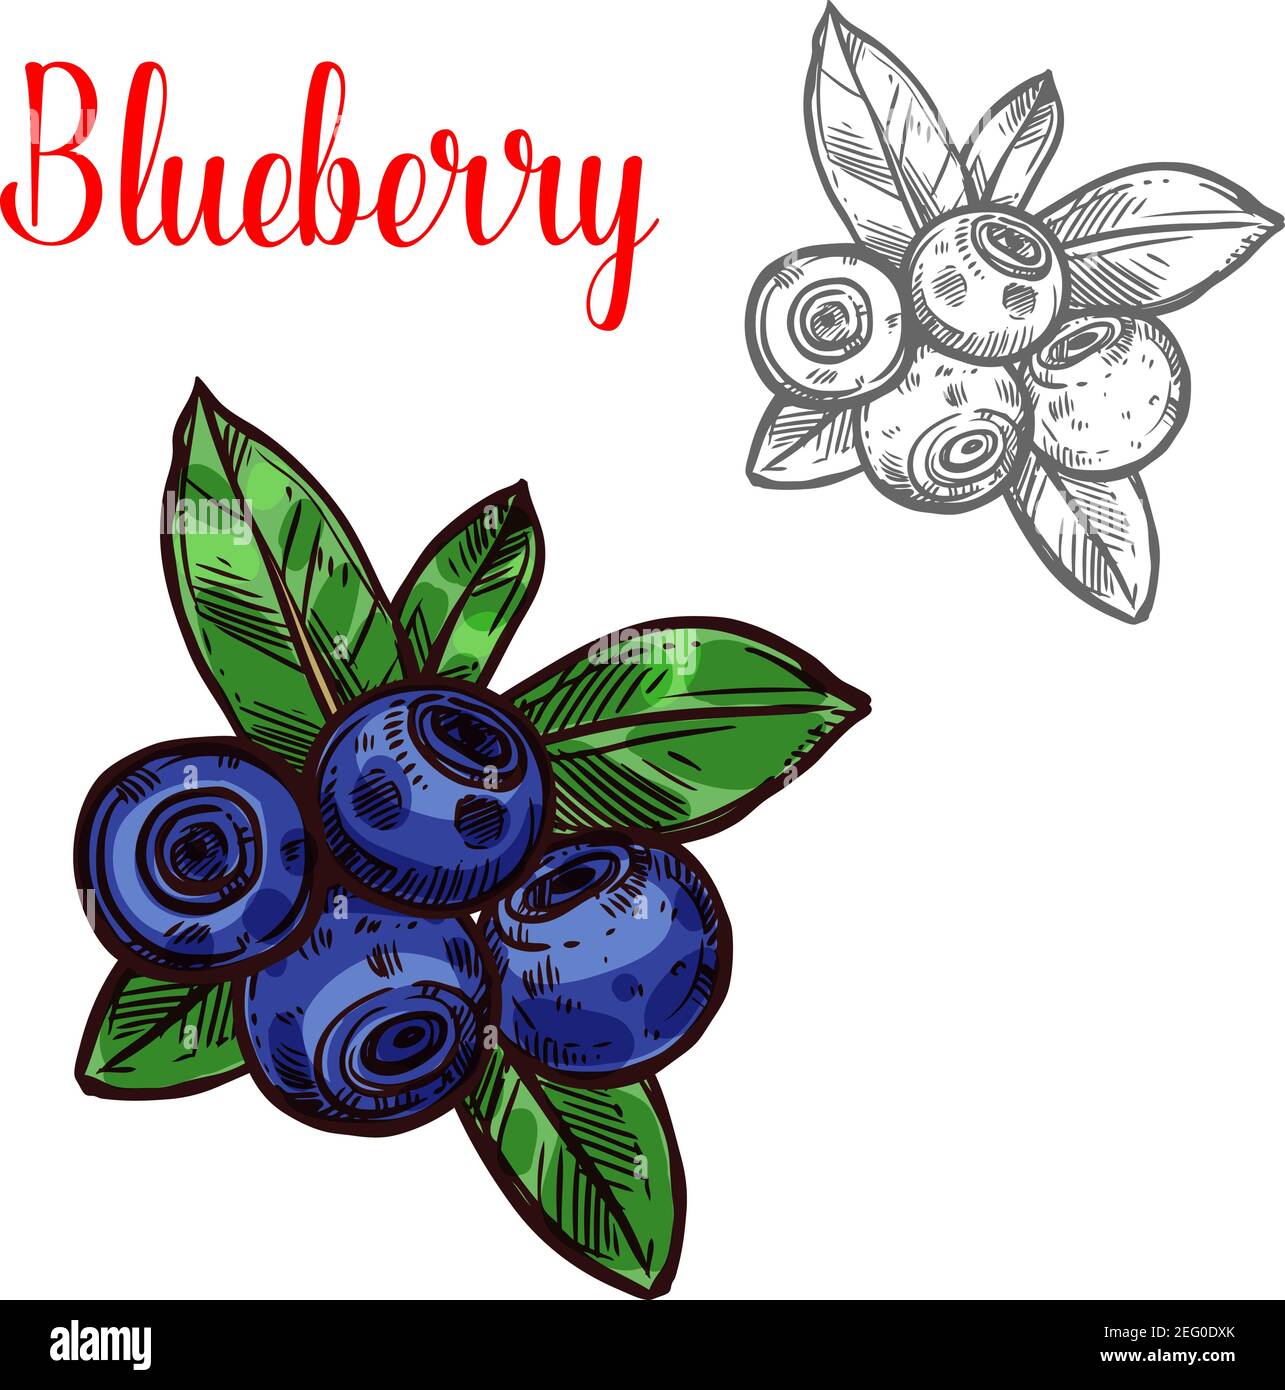 Blueberry berry sketch icon. Vector isolated symbol of fresh farm grown blueberries bunch with green leaf berry for juice or jam dessert or farmer mar Stock Vector